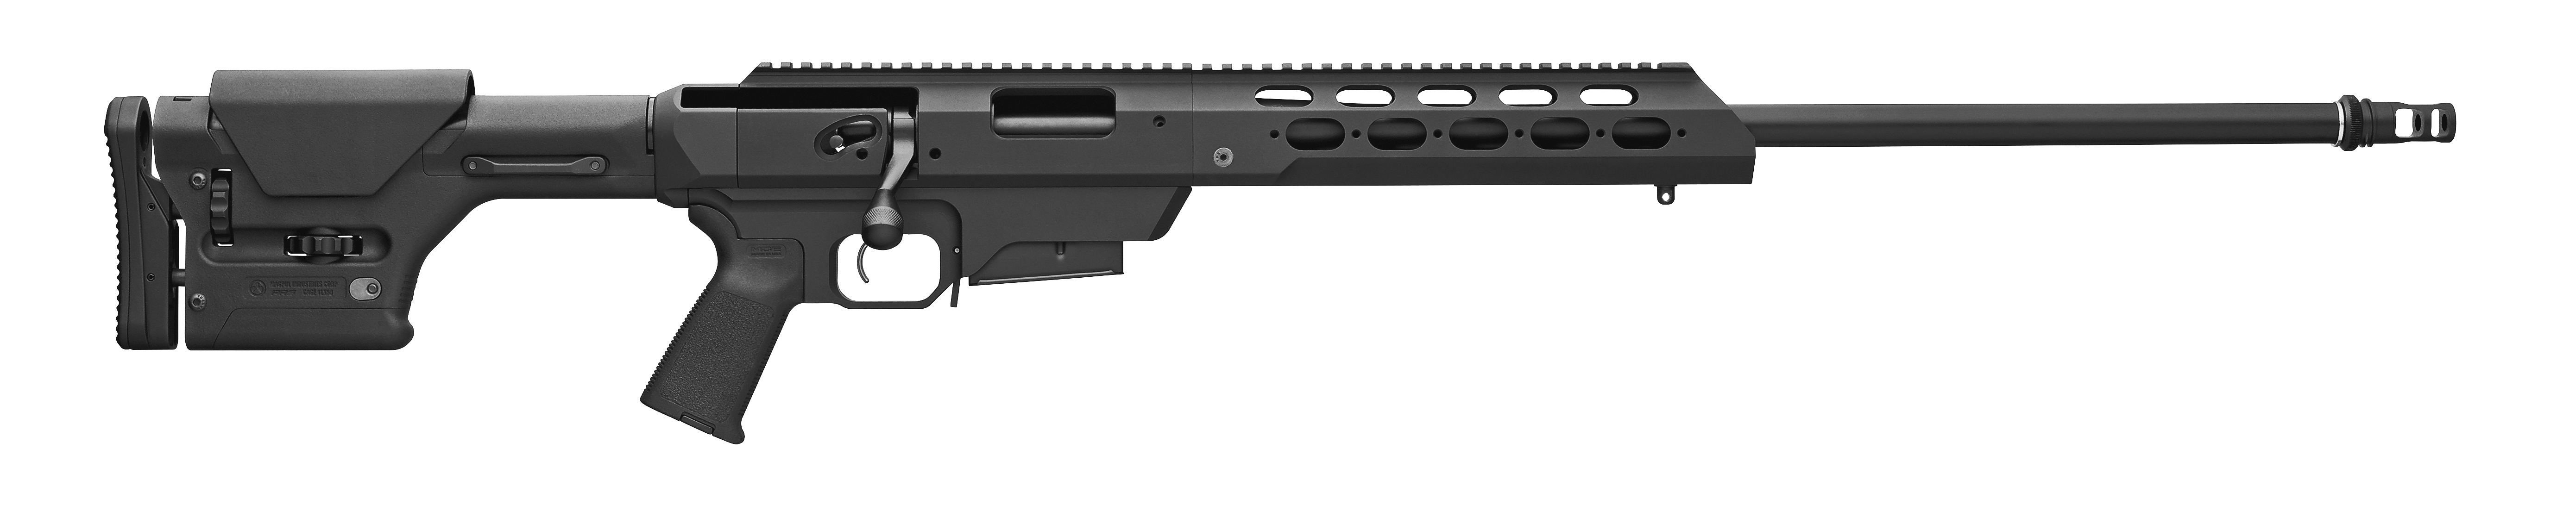 Model 700 Tactical Chassis